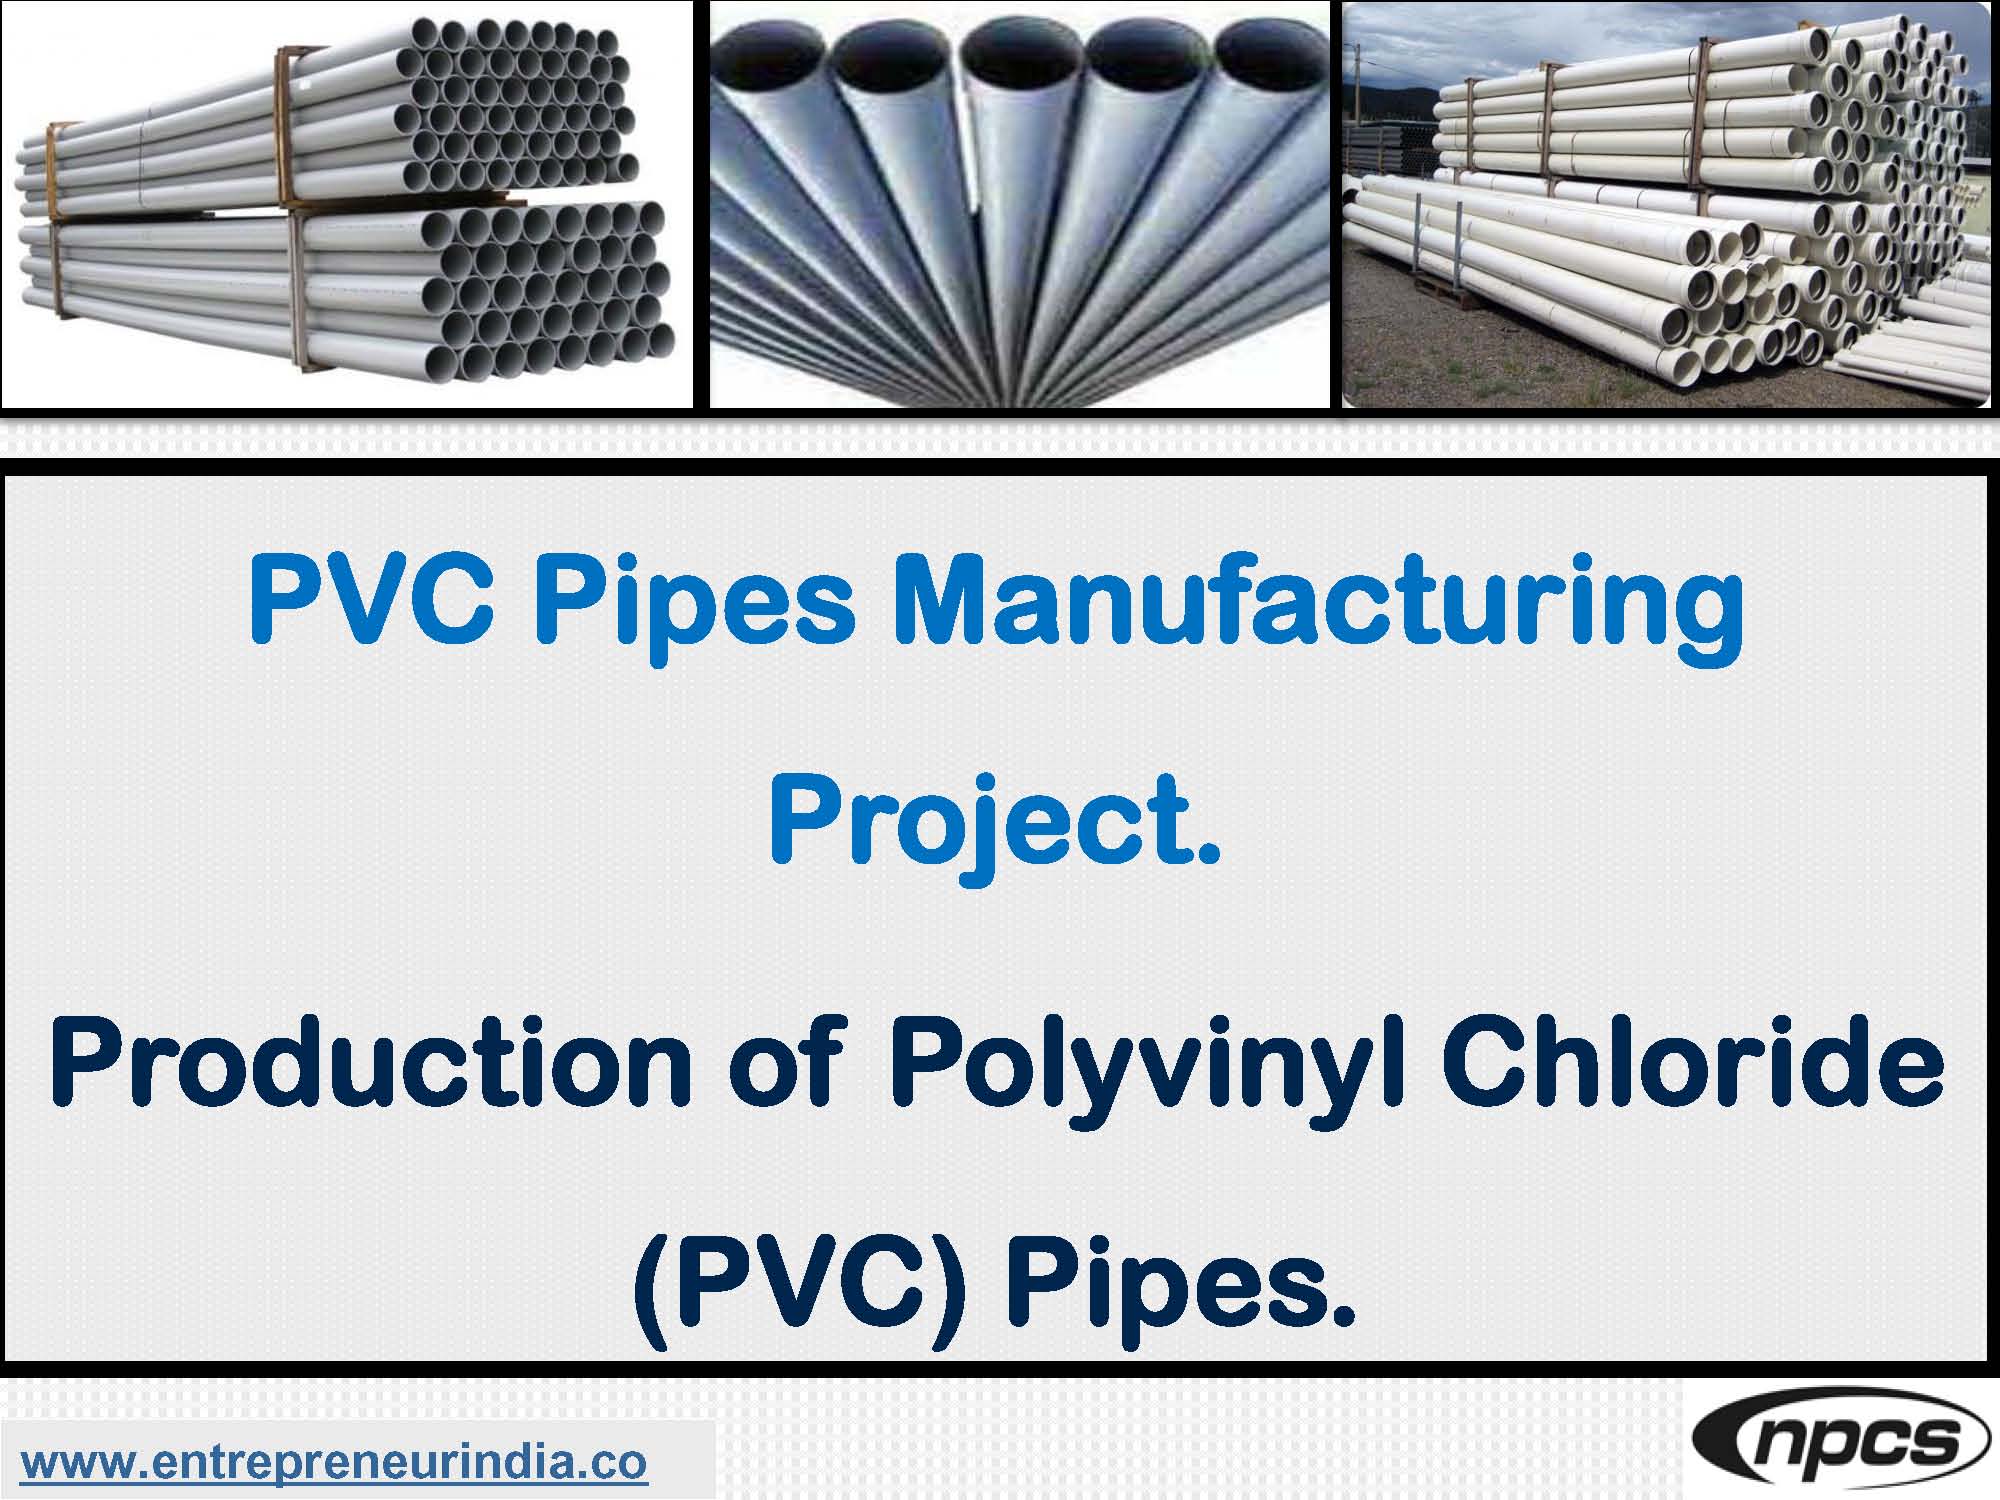 PVC Pipes Manufacturing Project, Production of Polyvinyl Chloride (PVC) Pipes